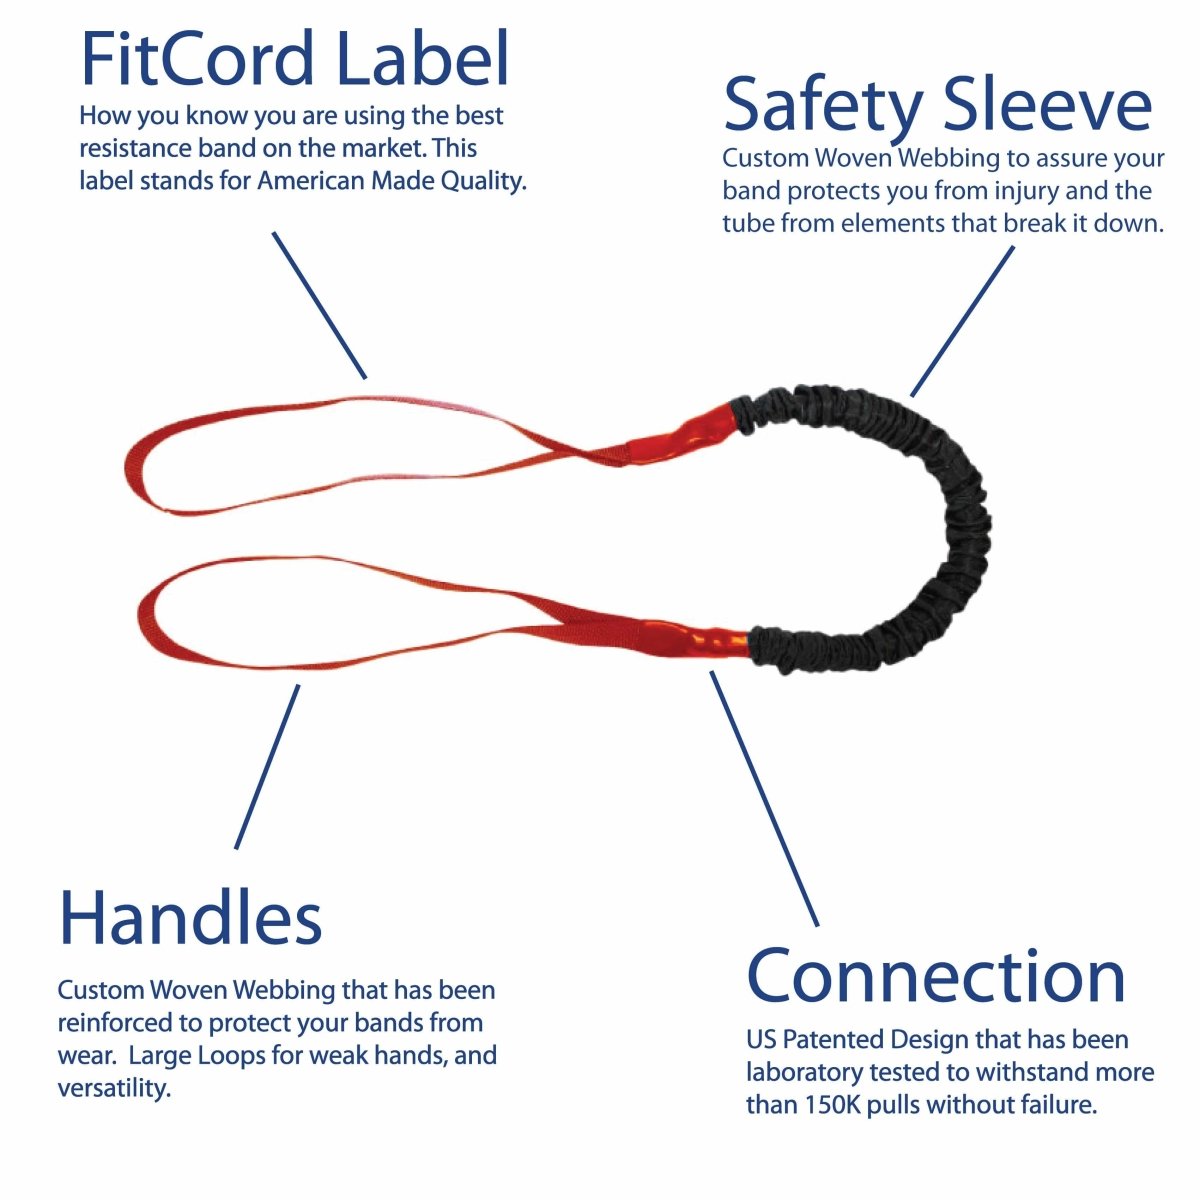 Perfect Therapy Band- Light (12lb) best resistance bands made in USA and covered for safety - FitCord Resistance Bands